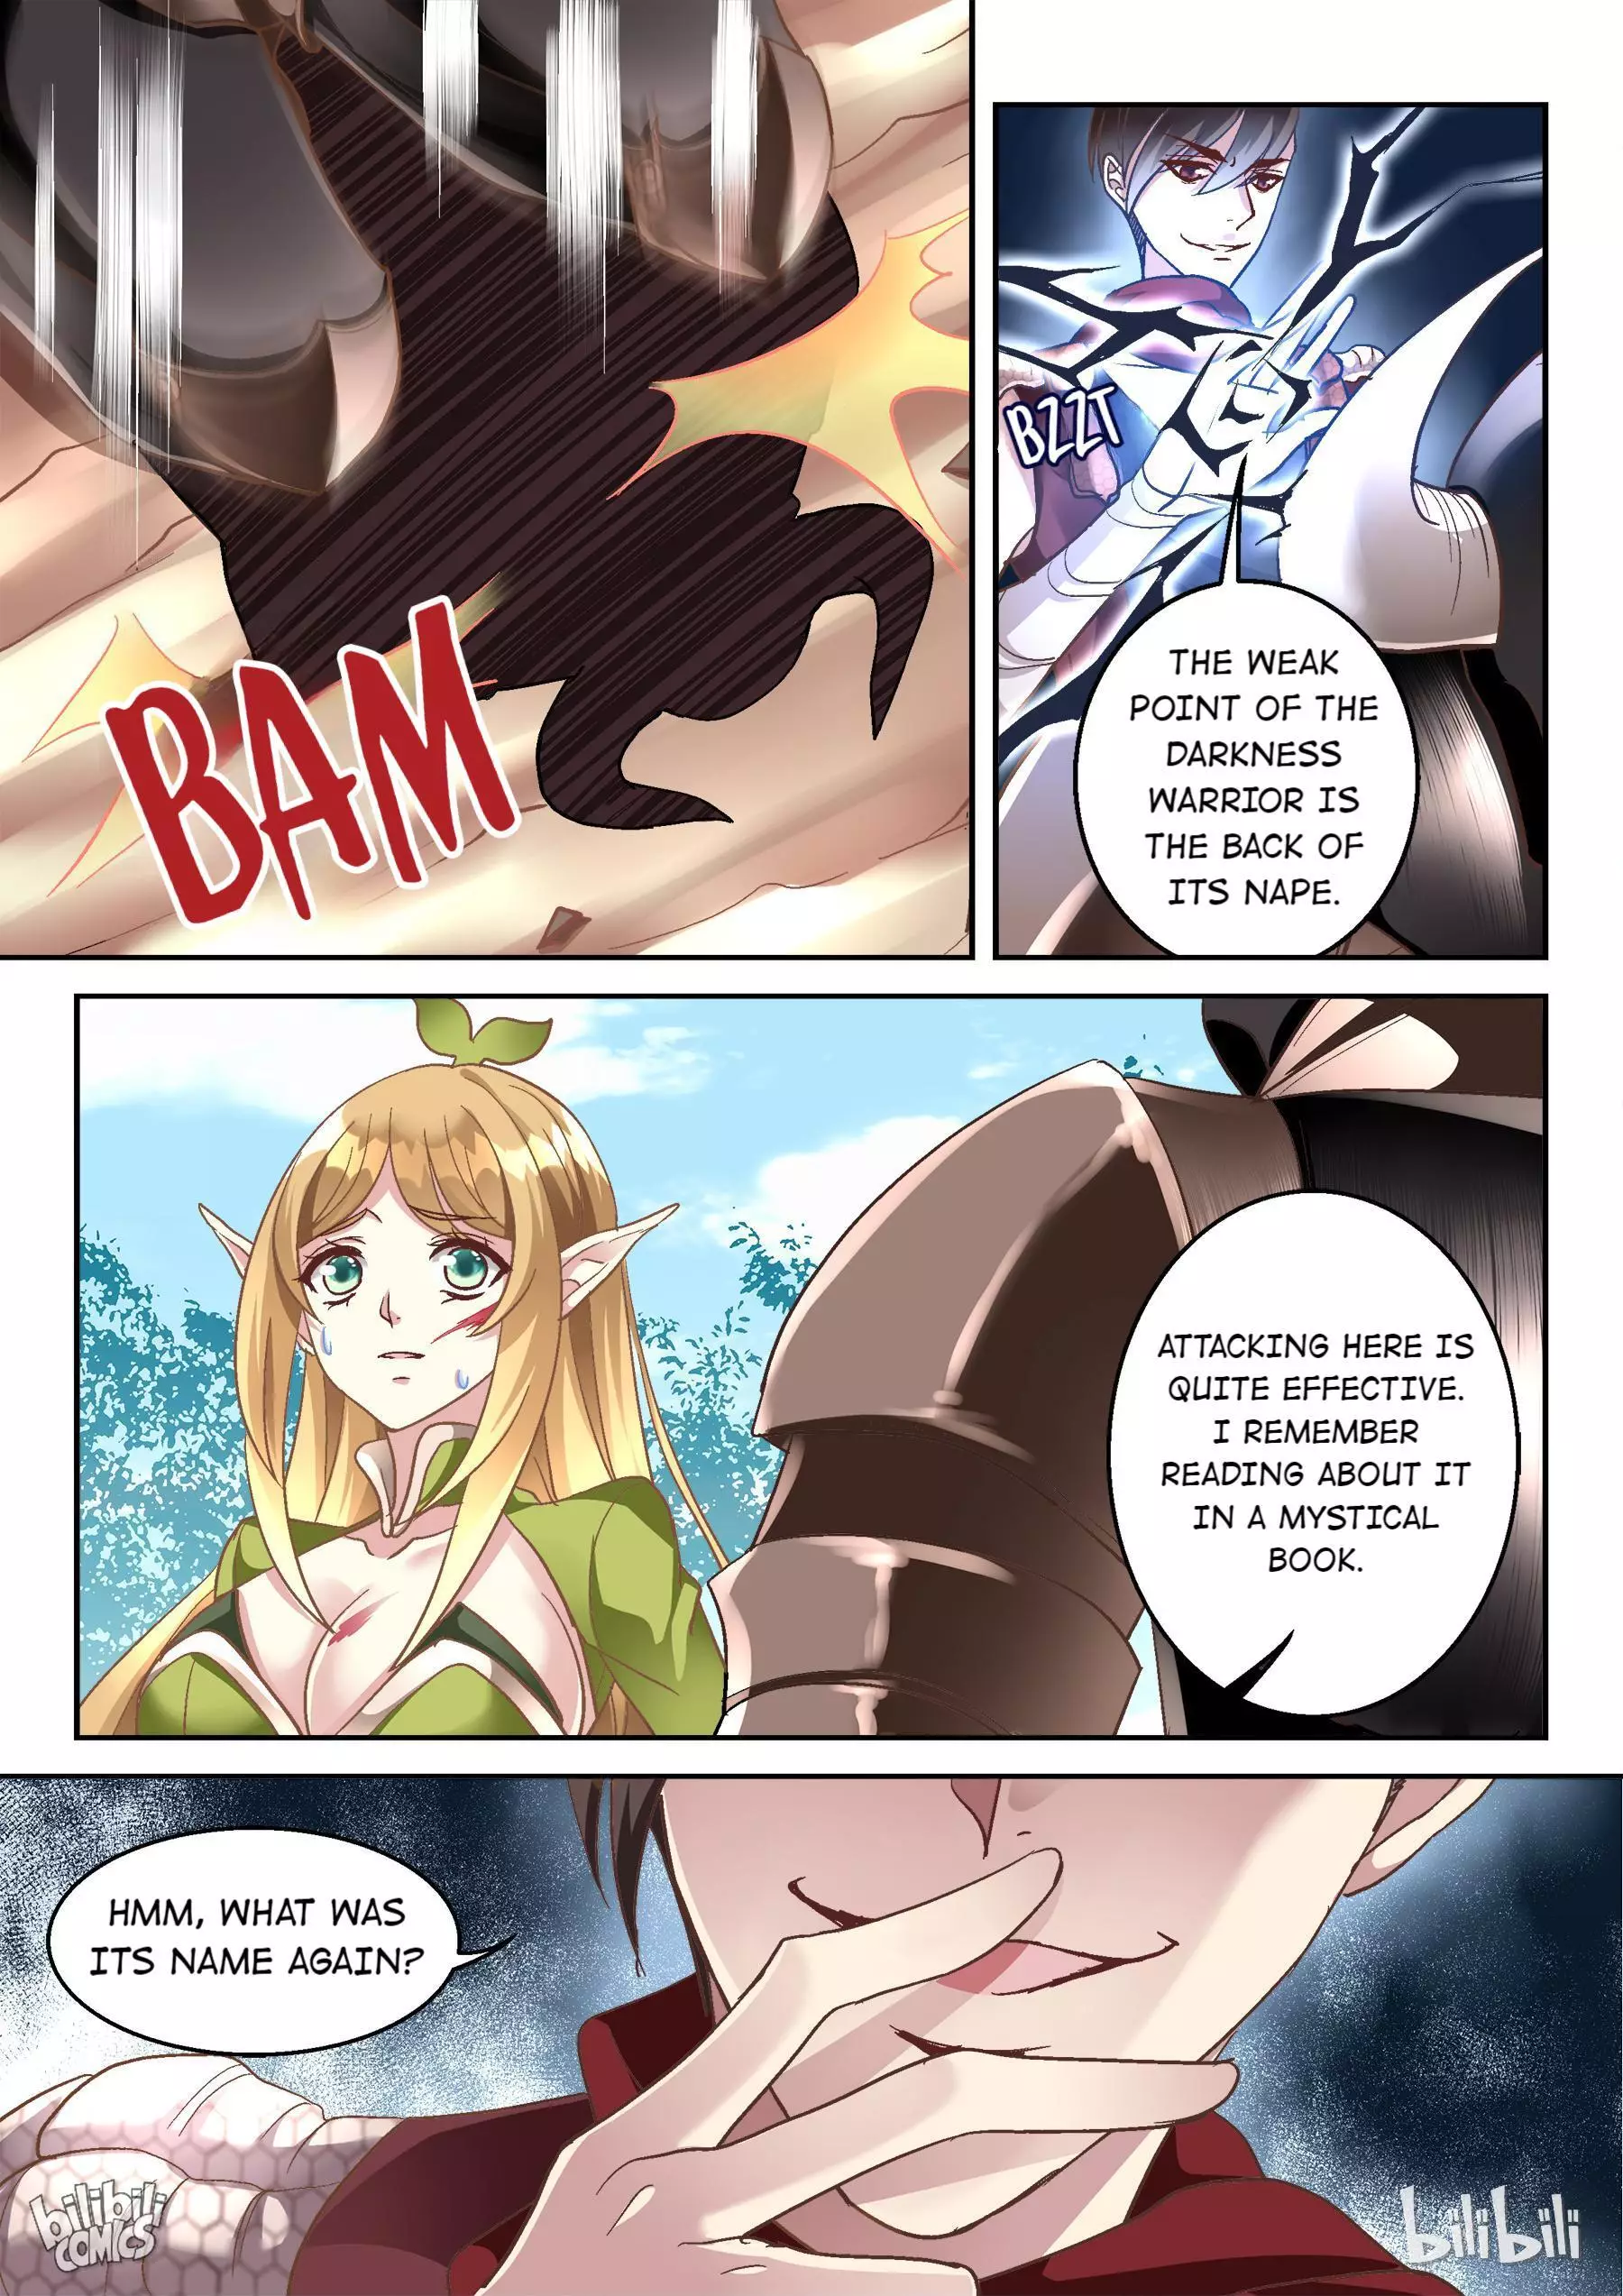 I Am The Undying God - 12 page 7-4437dc14